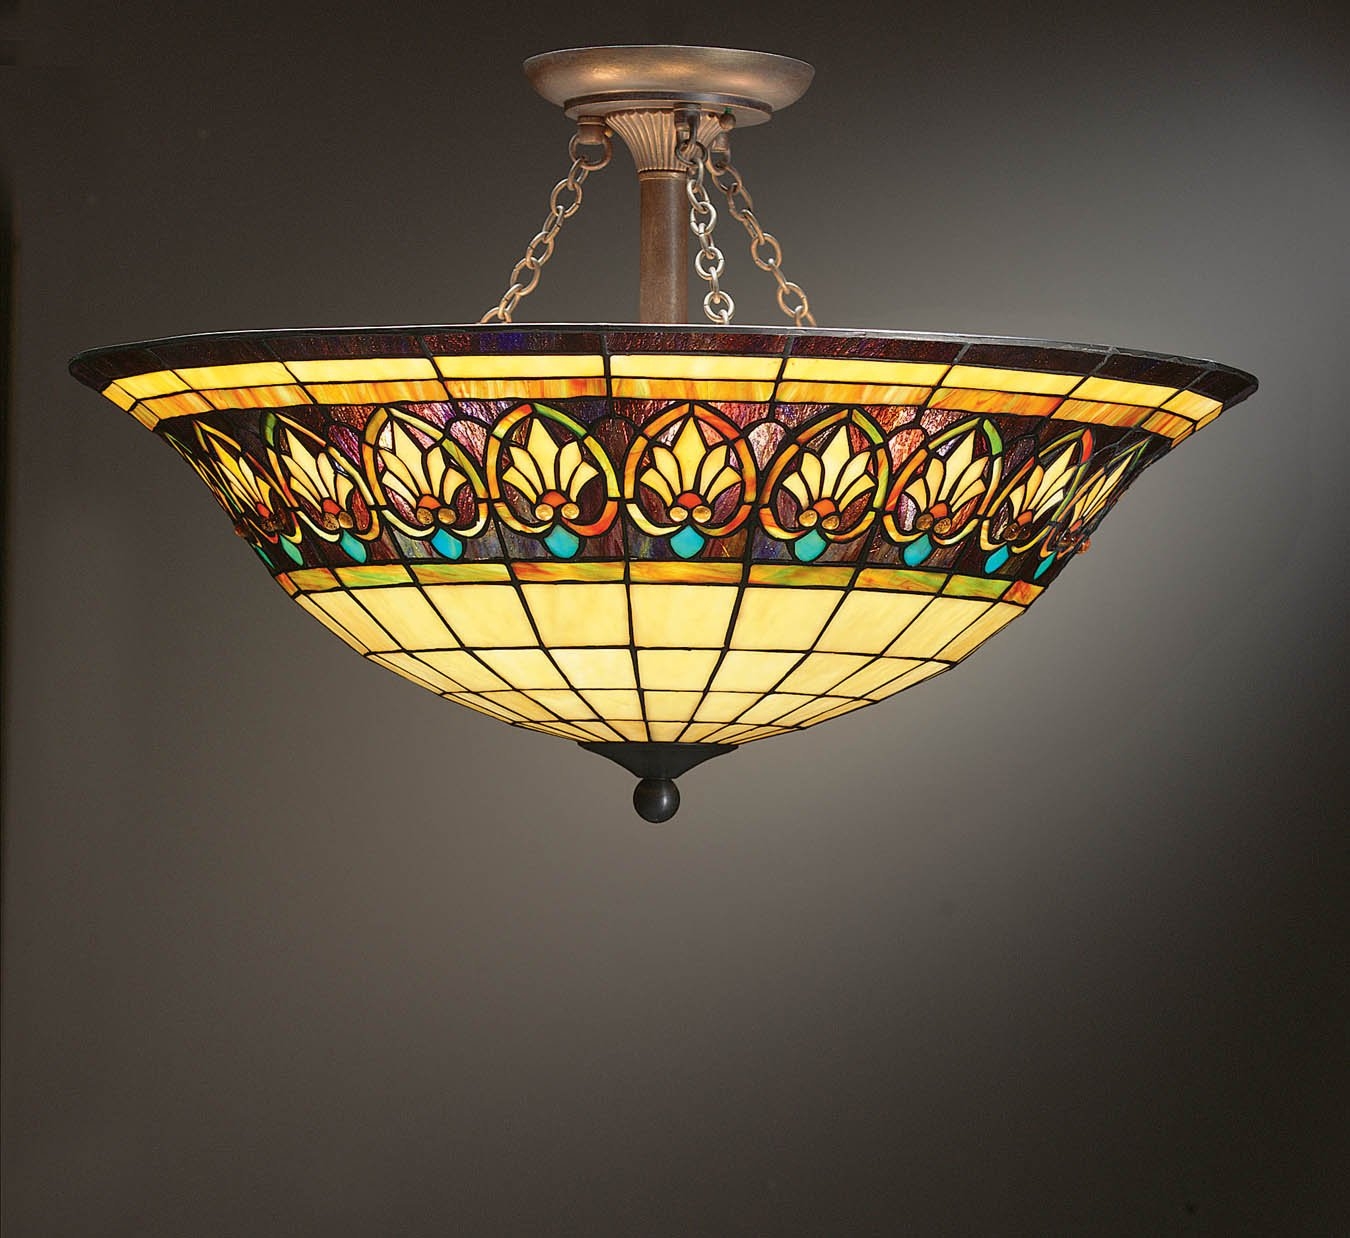 Permalink to Dale Tiffany Ceiling Light Fixtures